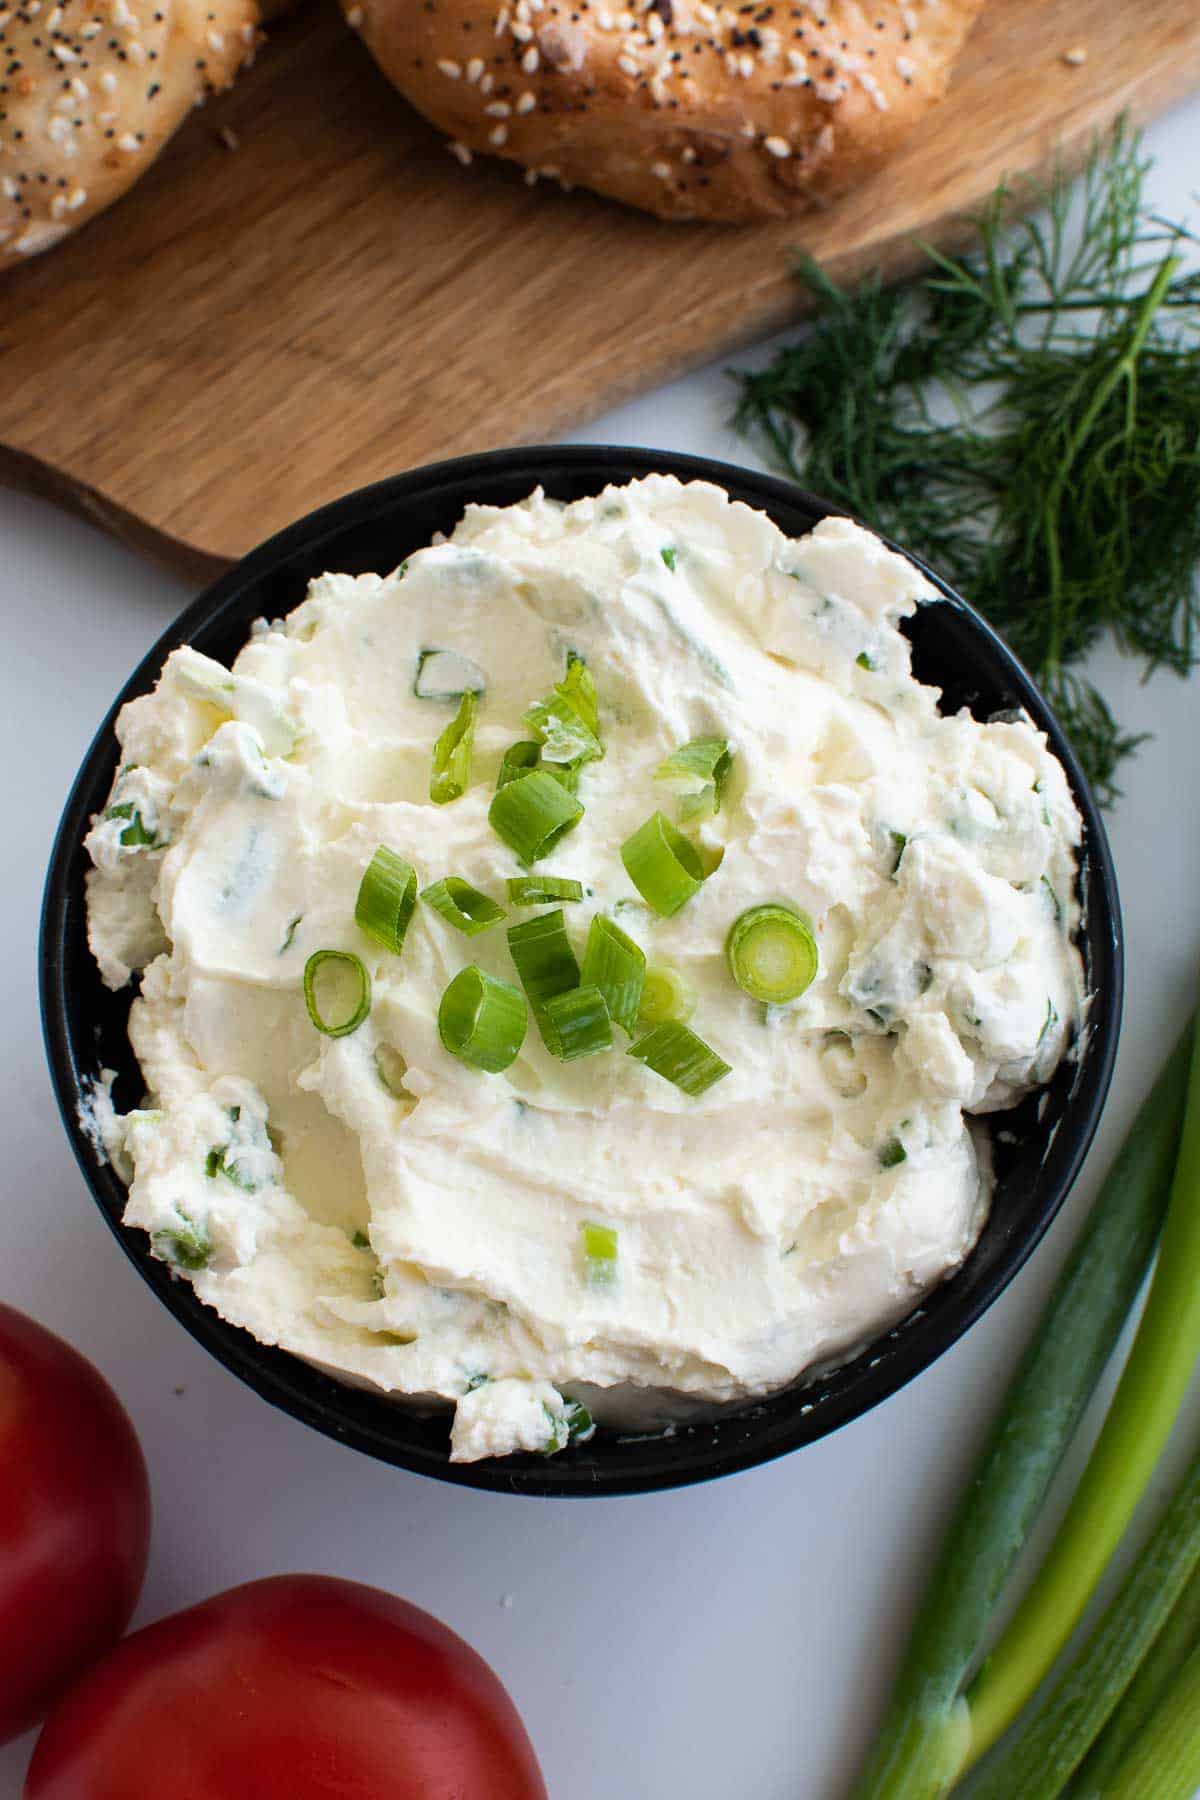 Cream cheese spread with scallions, with herbs and bagels on the side.